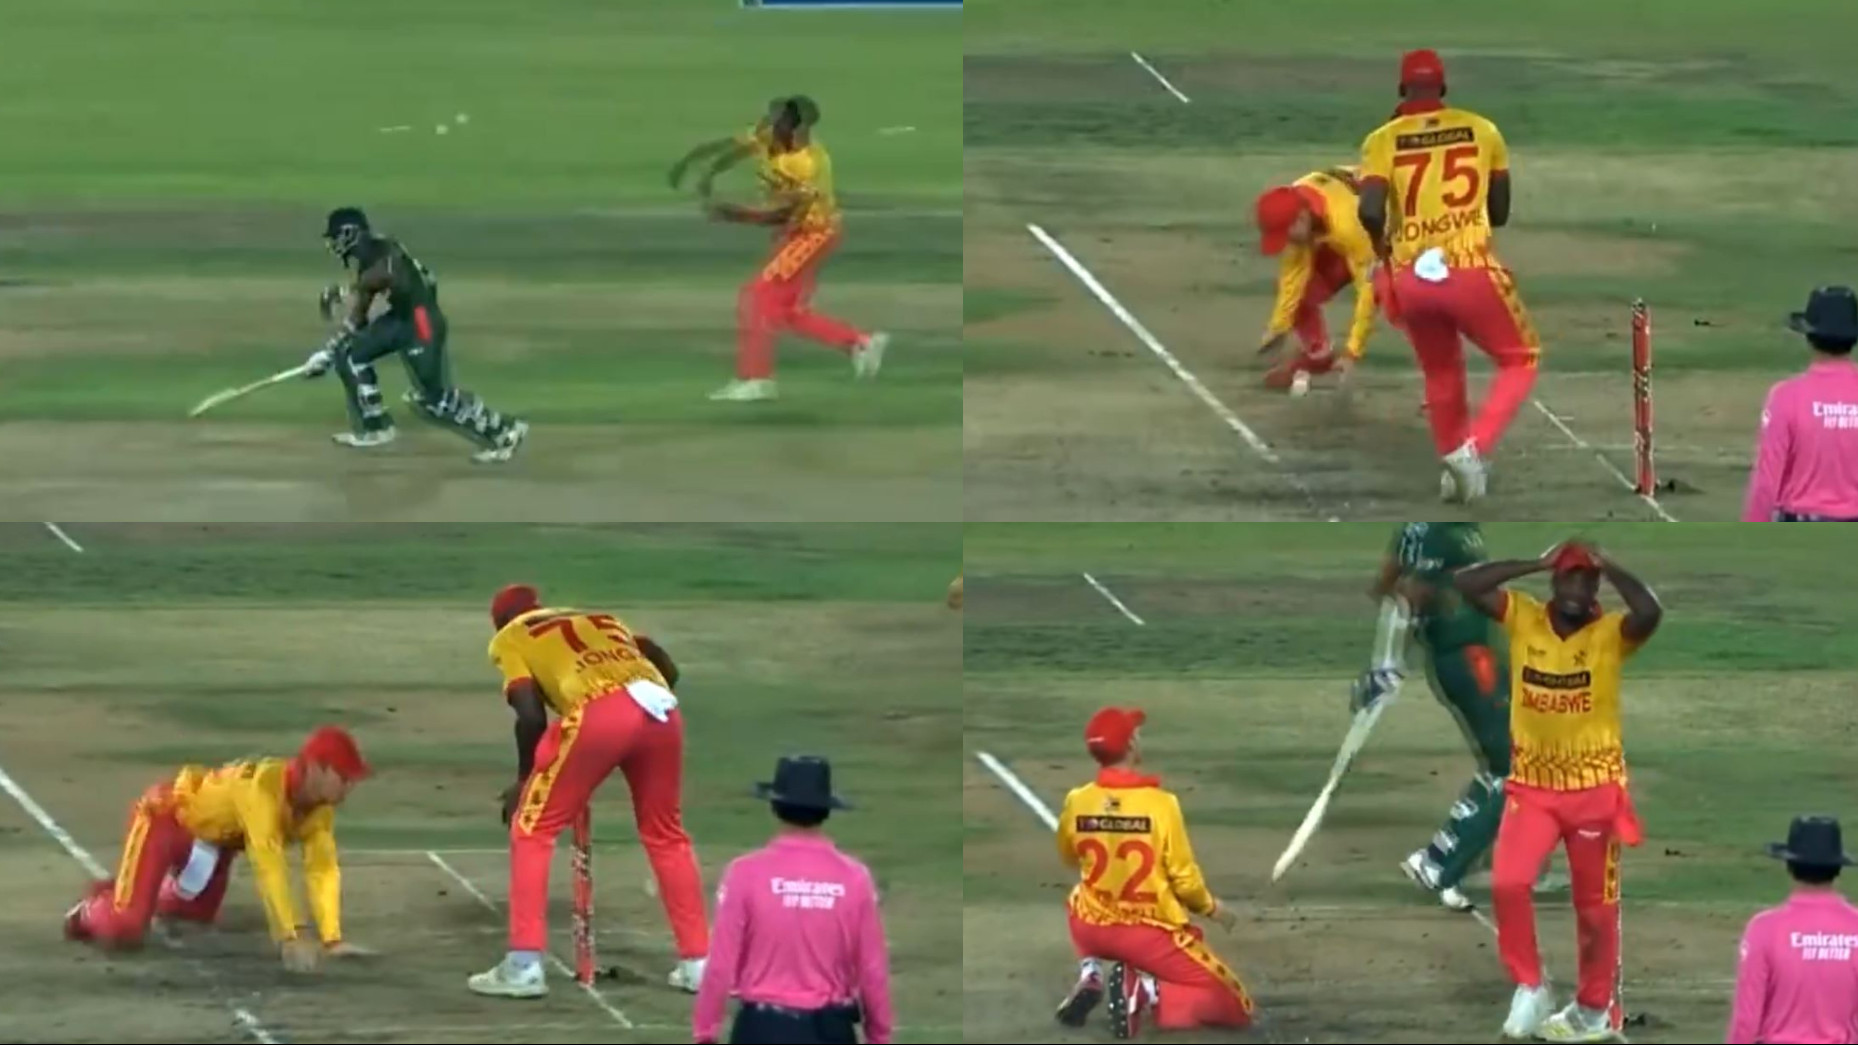 WATCH- Comedy of error results in Zimbabwe missing double run out chance against Bangladesh